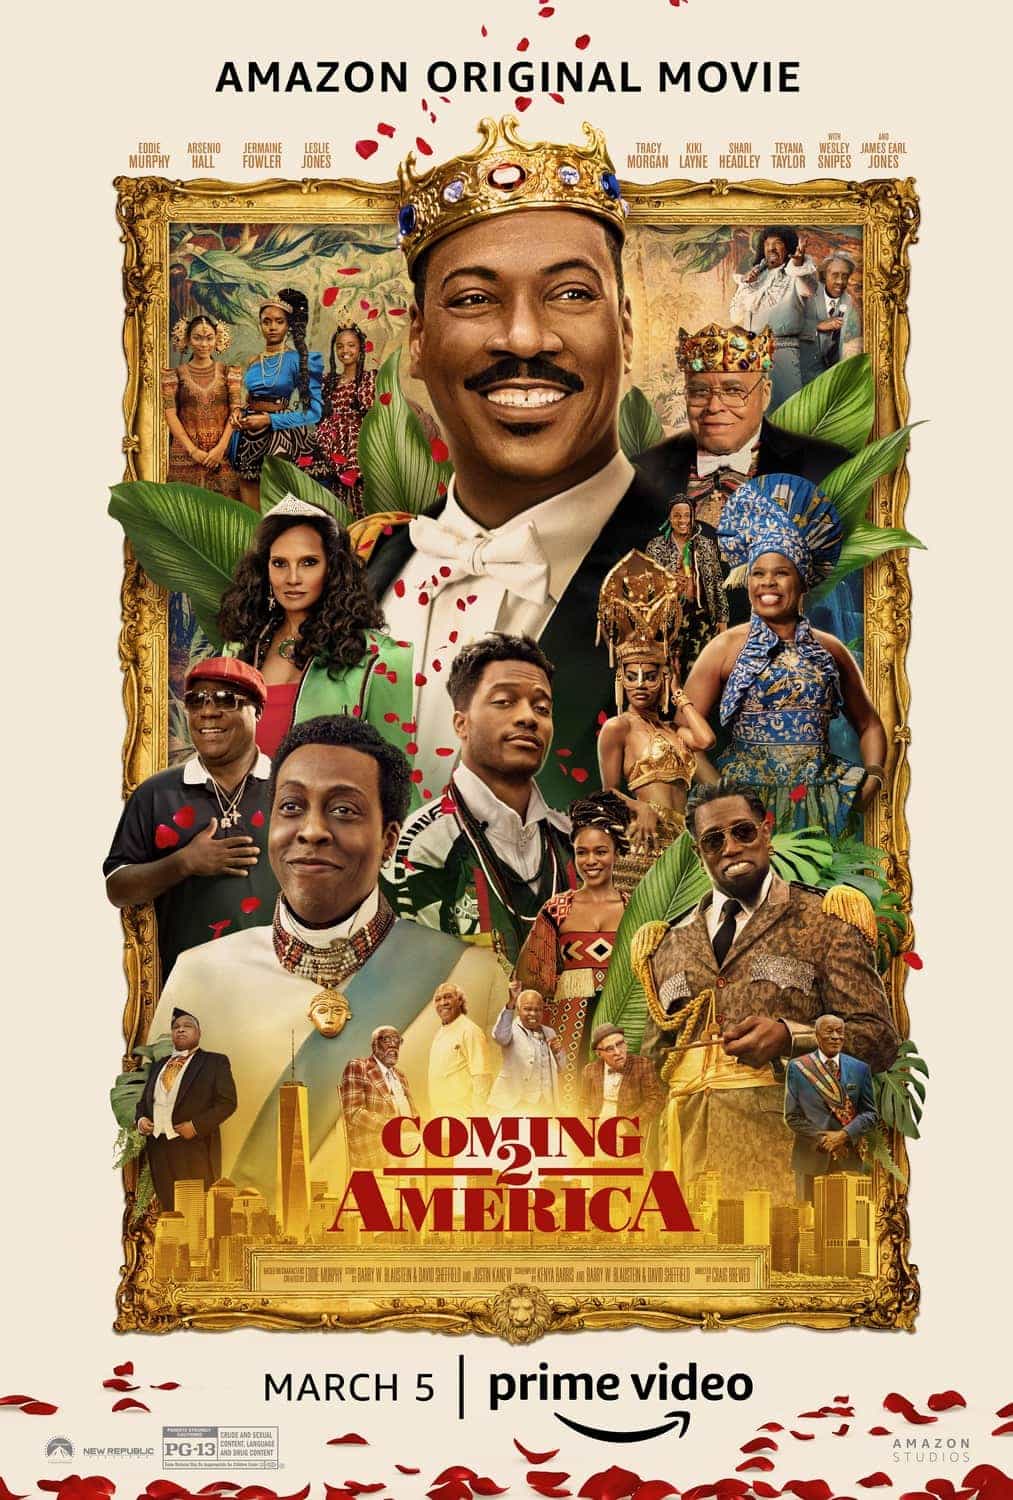 Coming 2 America gets first trailer. movie gets released onto Prime Video March 5th 2021